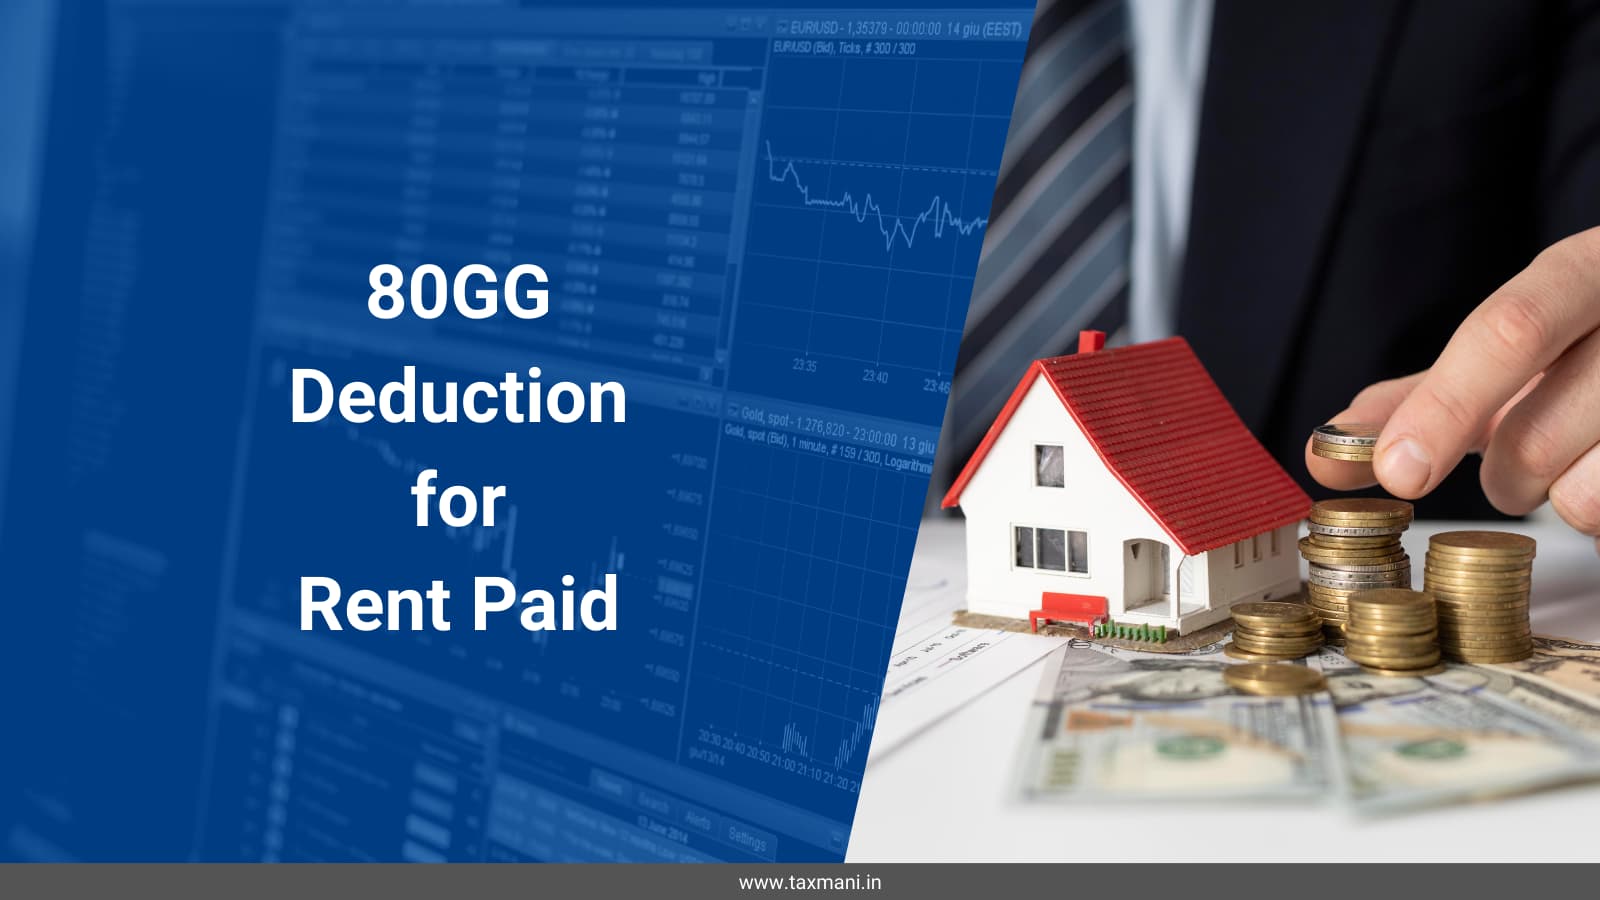 80GG Deduction for Rent Paid